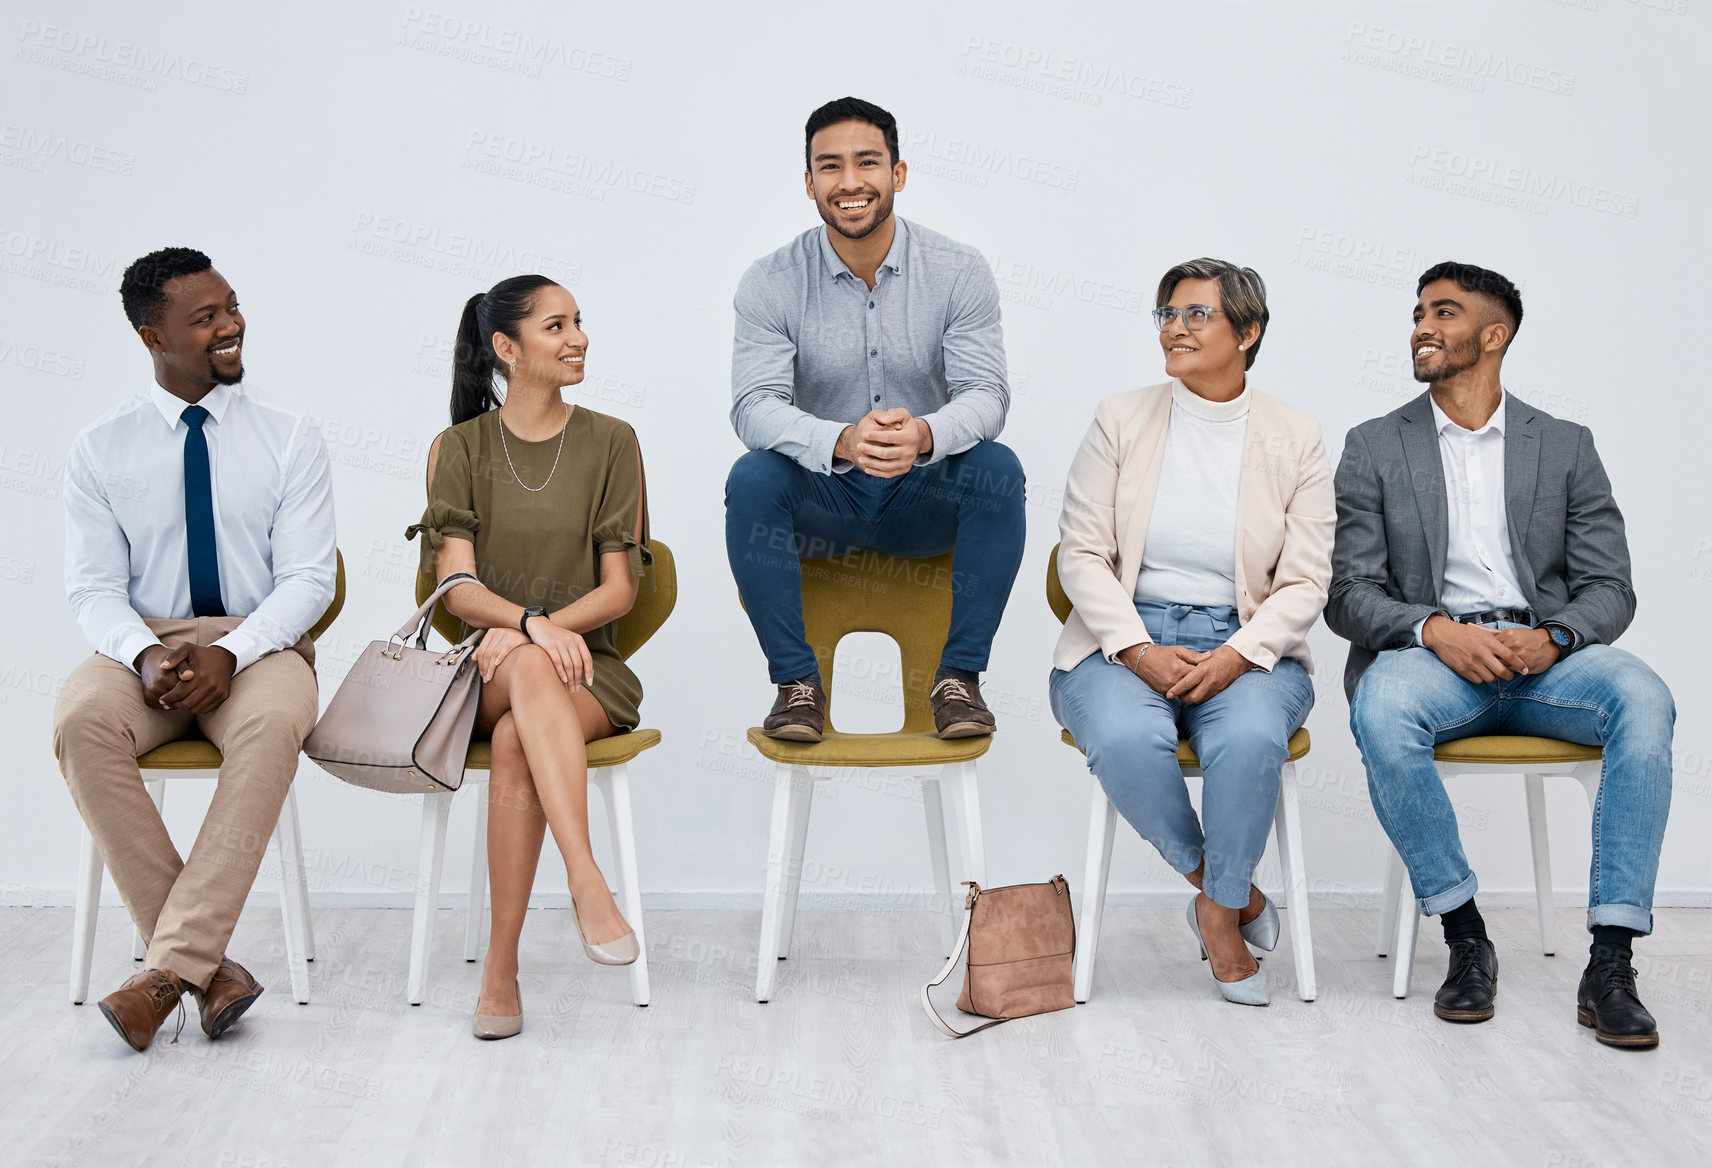 Buy stock photo Studio portrait of a young businessman sitting on a chair alongside candidates against a white background